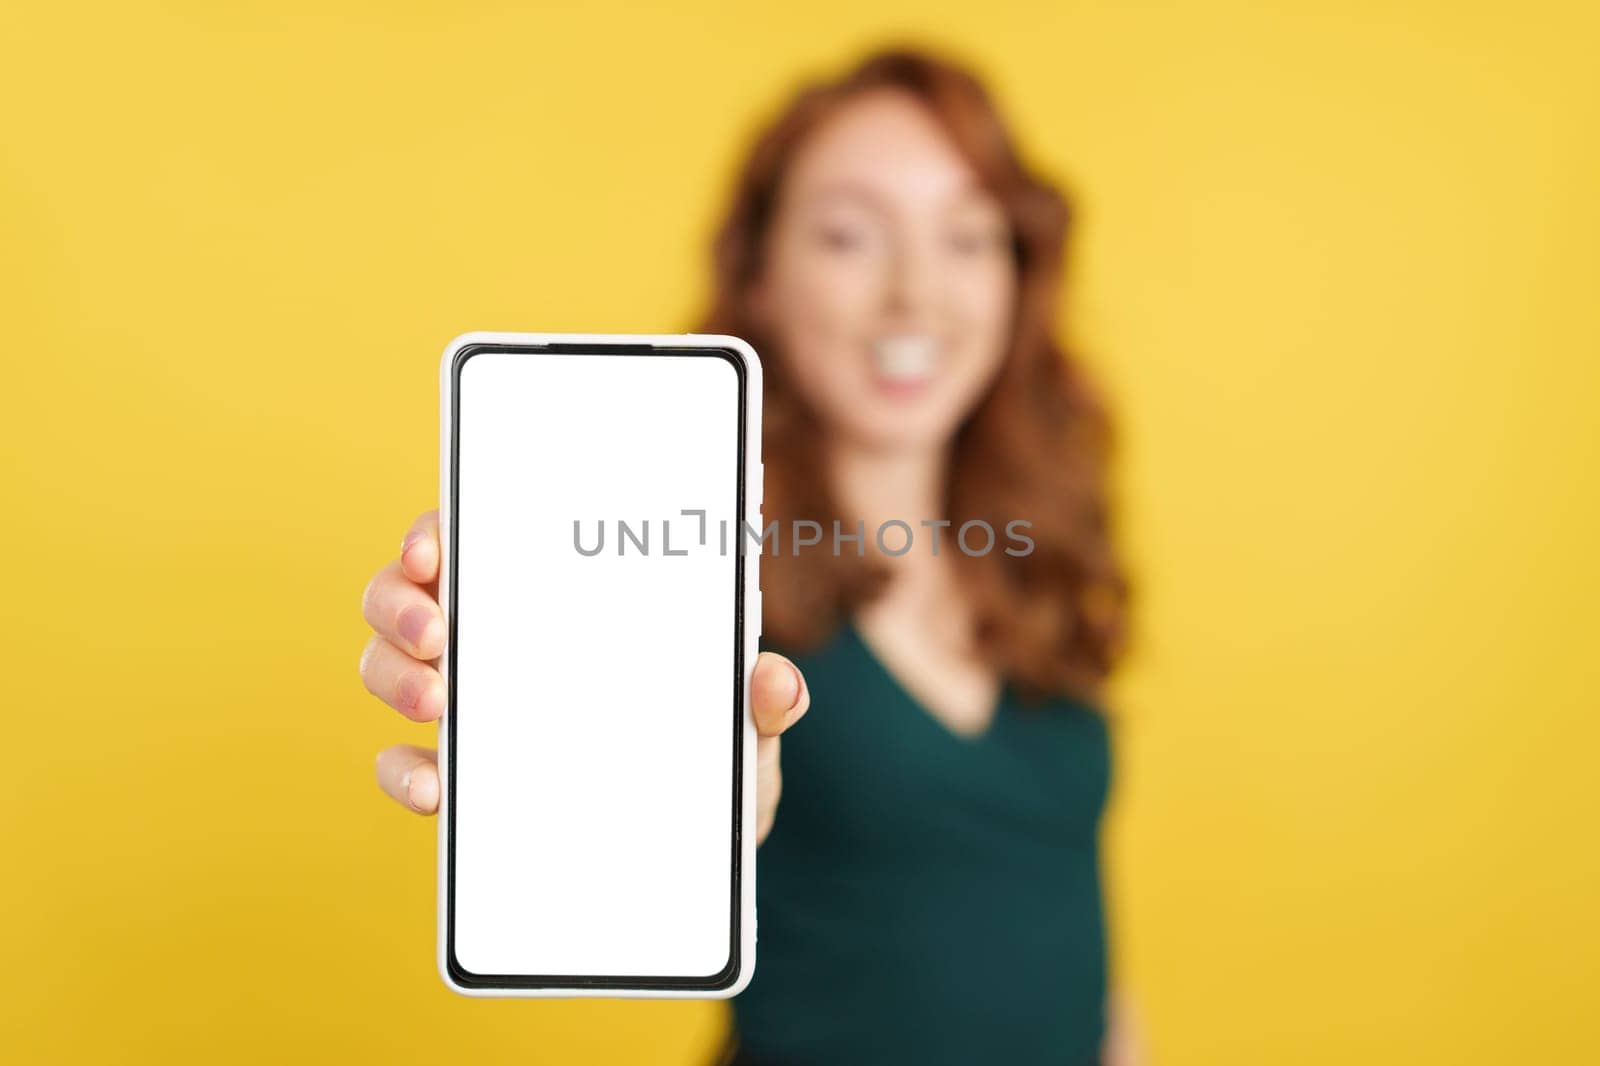 Blank screen of the mobile held by a redheaded woman in studio with yellow background